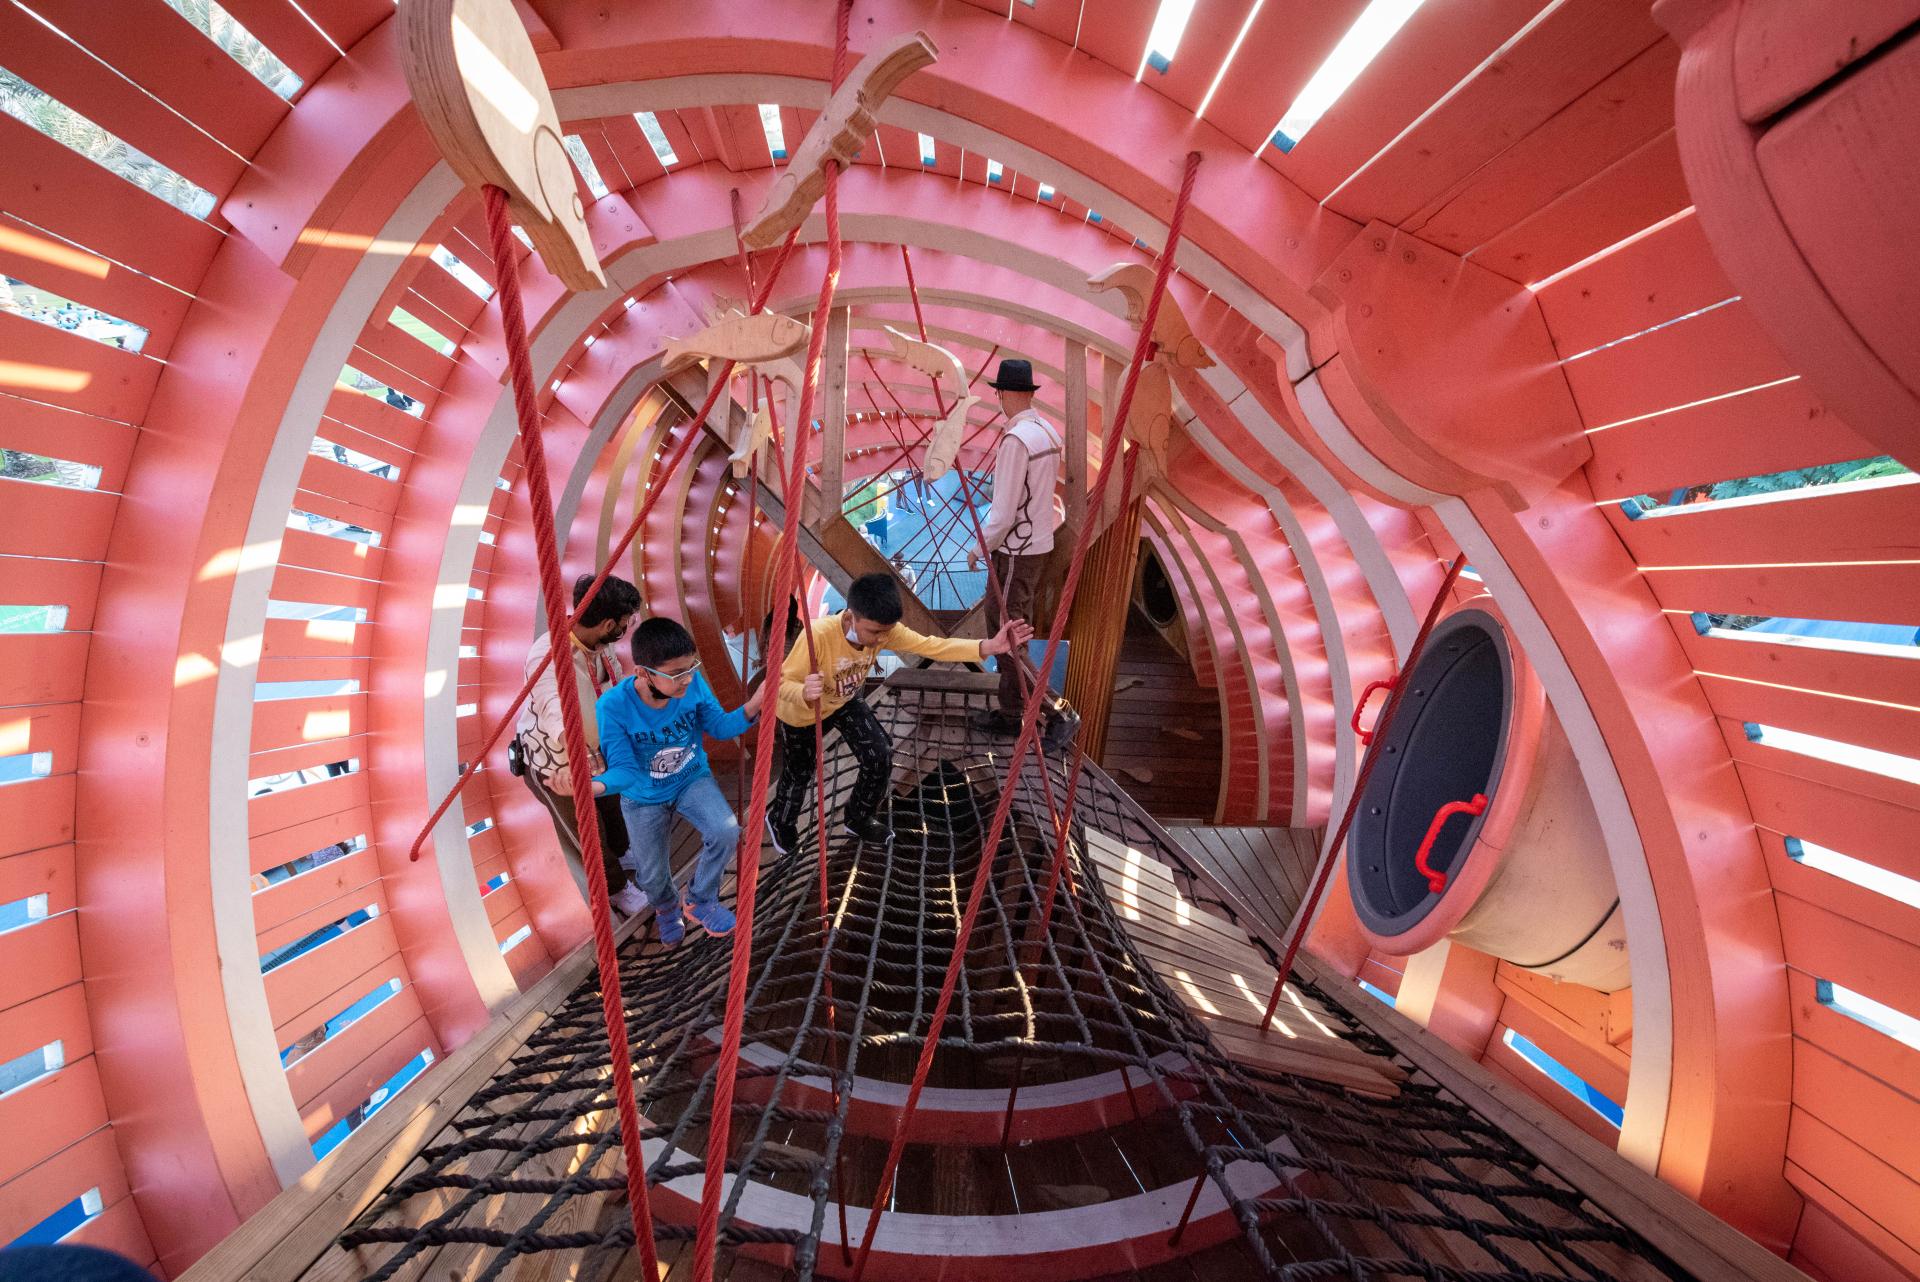 Children playing inside whale playground, MONSTRUM playgrounds